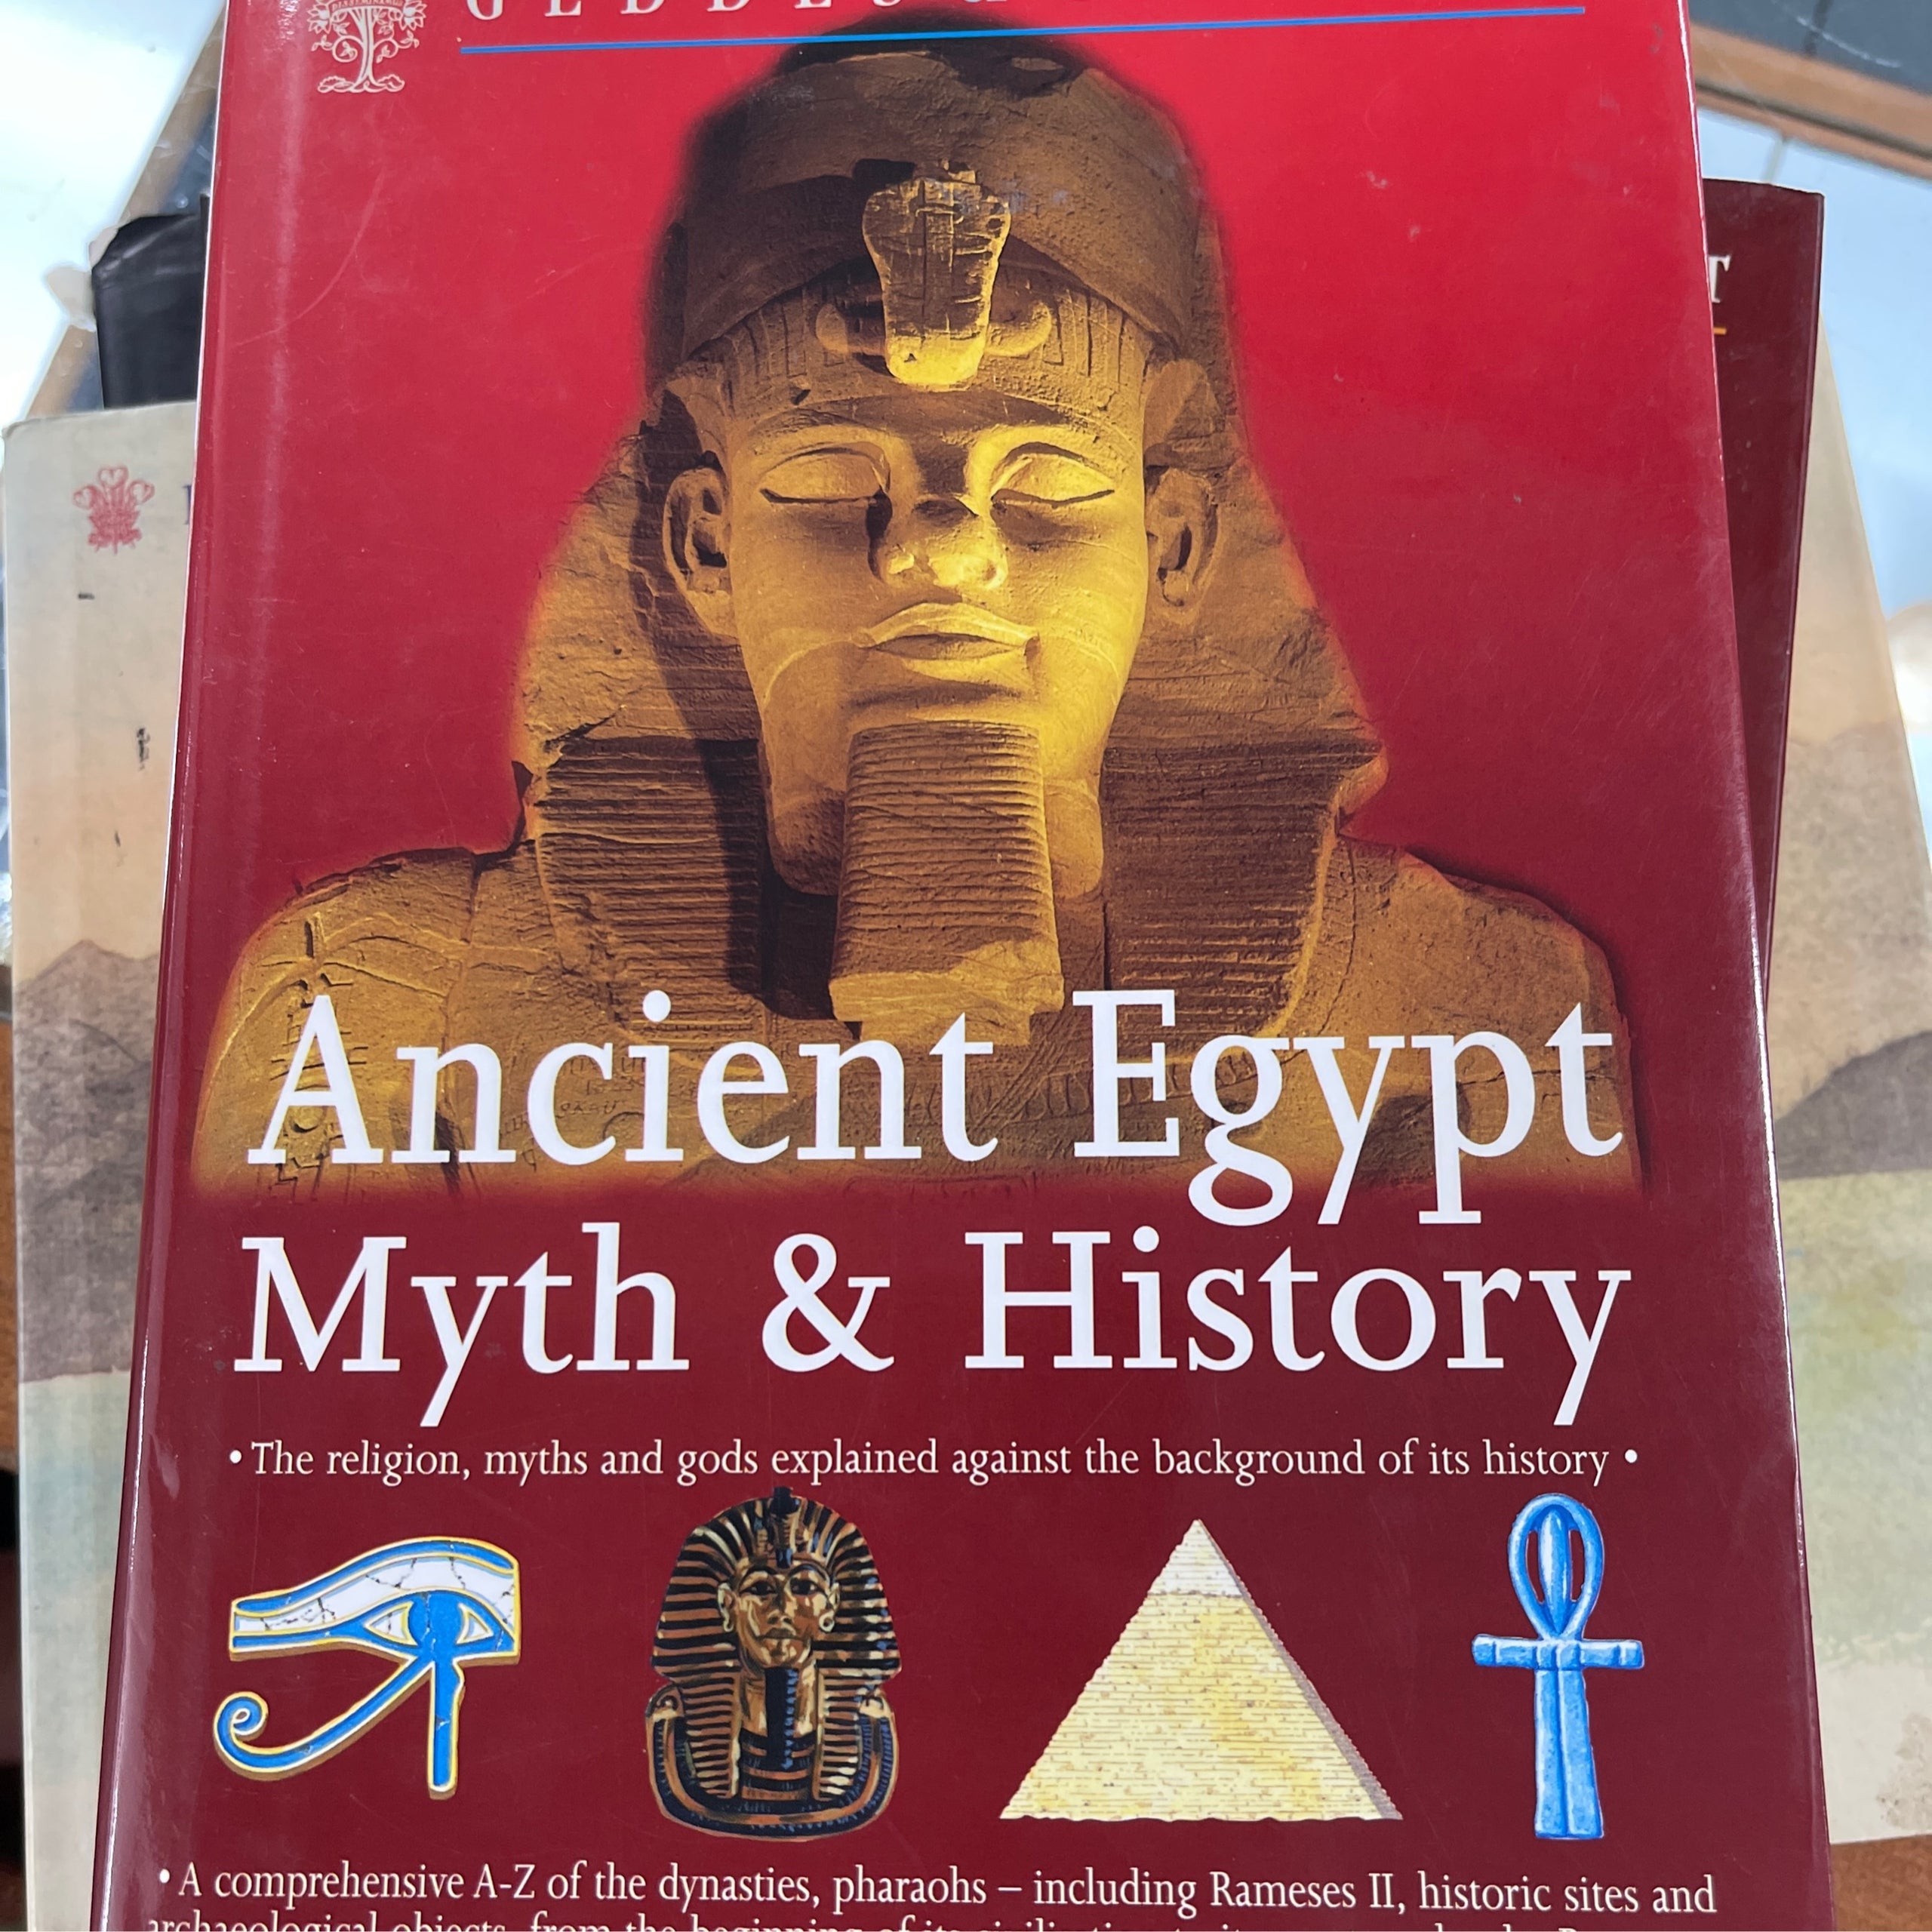 Ancient Egypt Myth & History | Just Seconds & Collectables